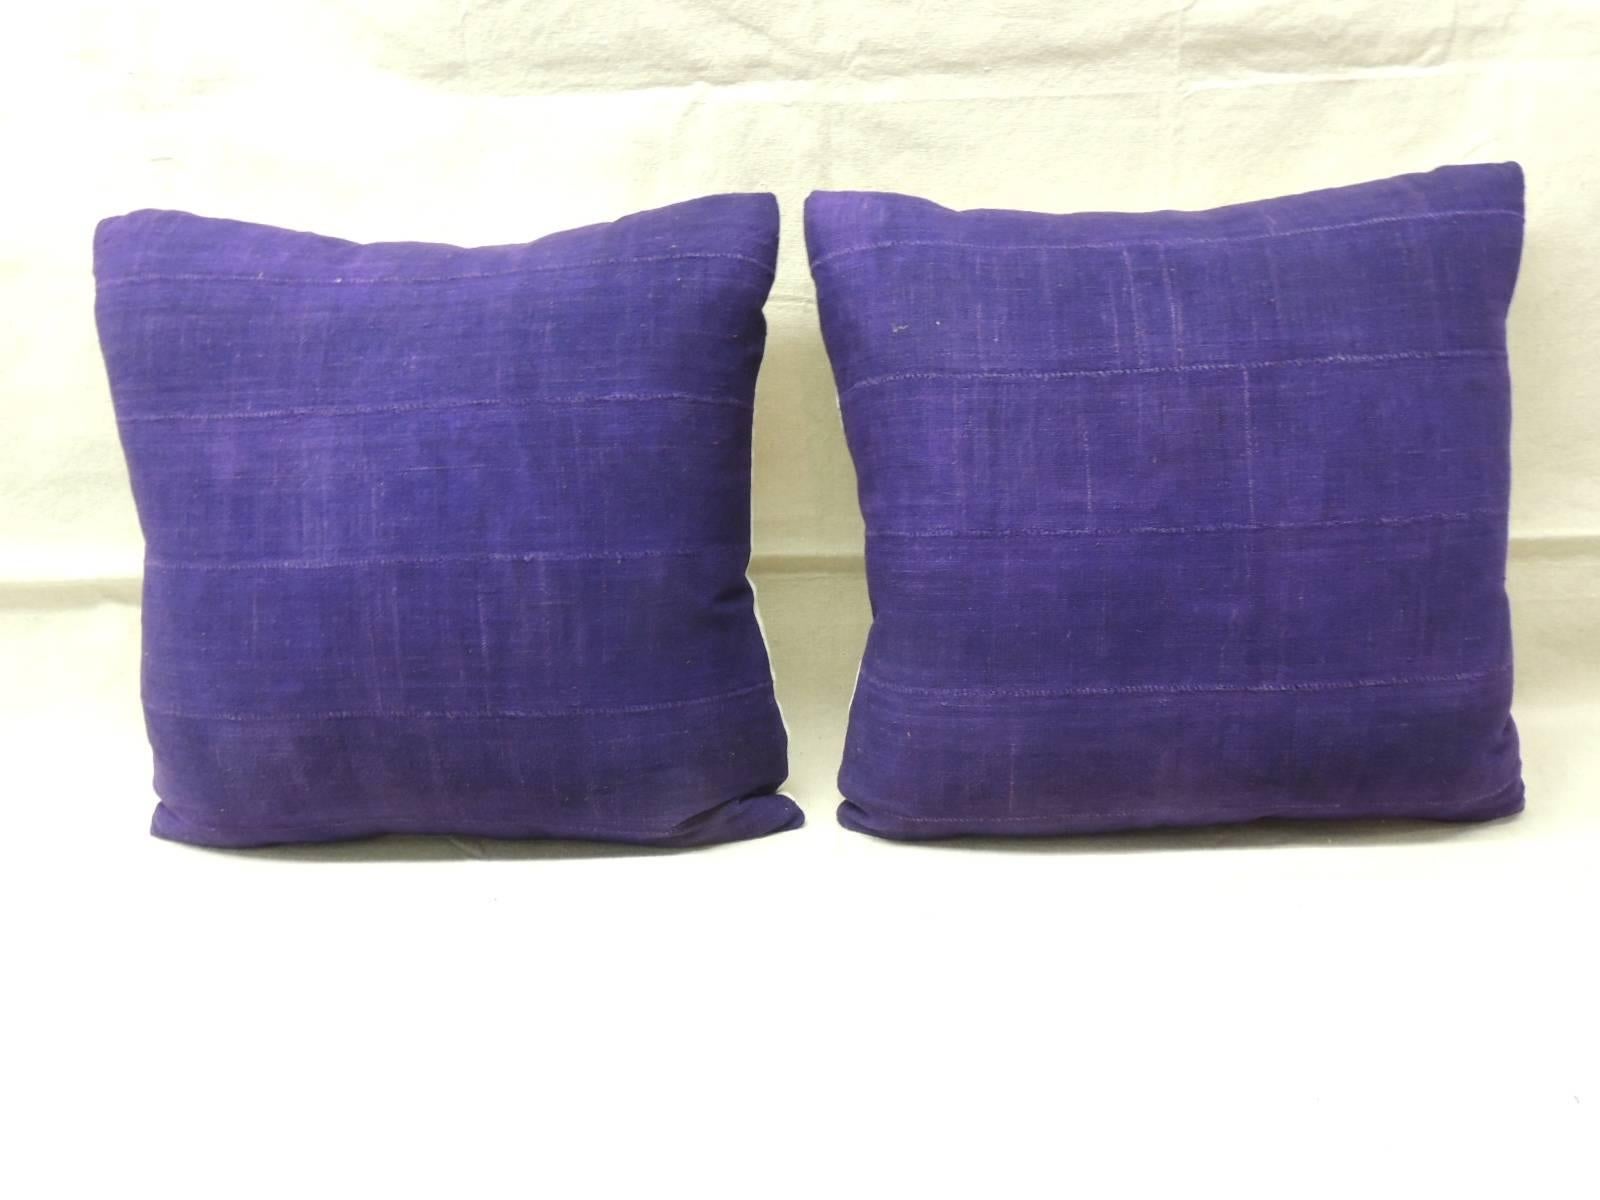 Pair of African deep purple mud cloth decorative pillows with natural vintage linen backing. 
Accent pillows hand-crafted and designed in the USA with custom made pillow inserts. 
Decorative pillows with hand-stitched closure (no zipper.)
Ideal for